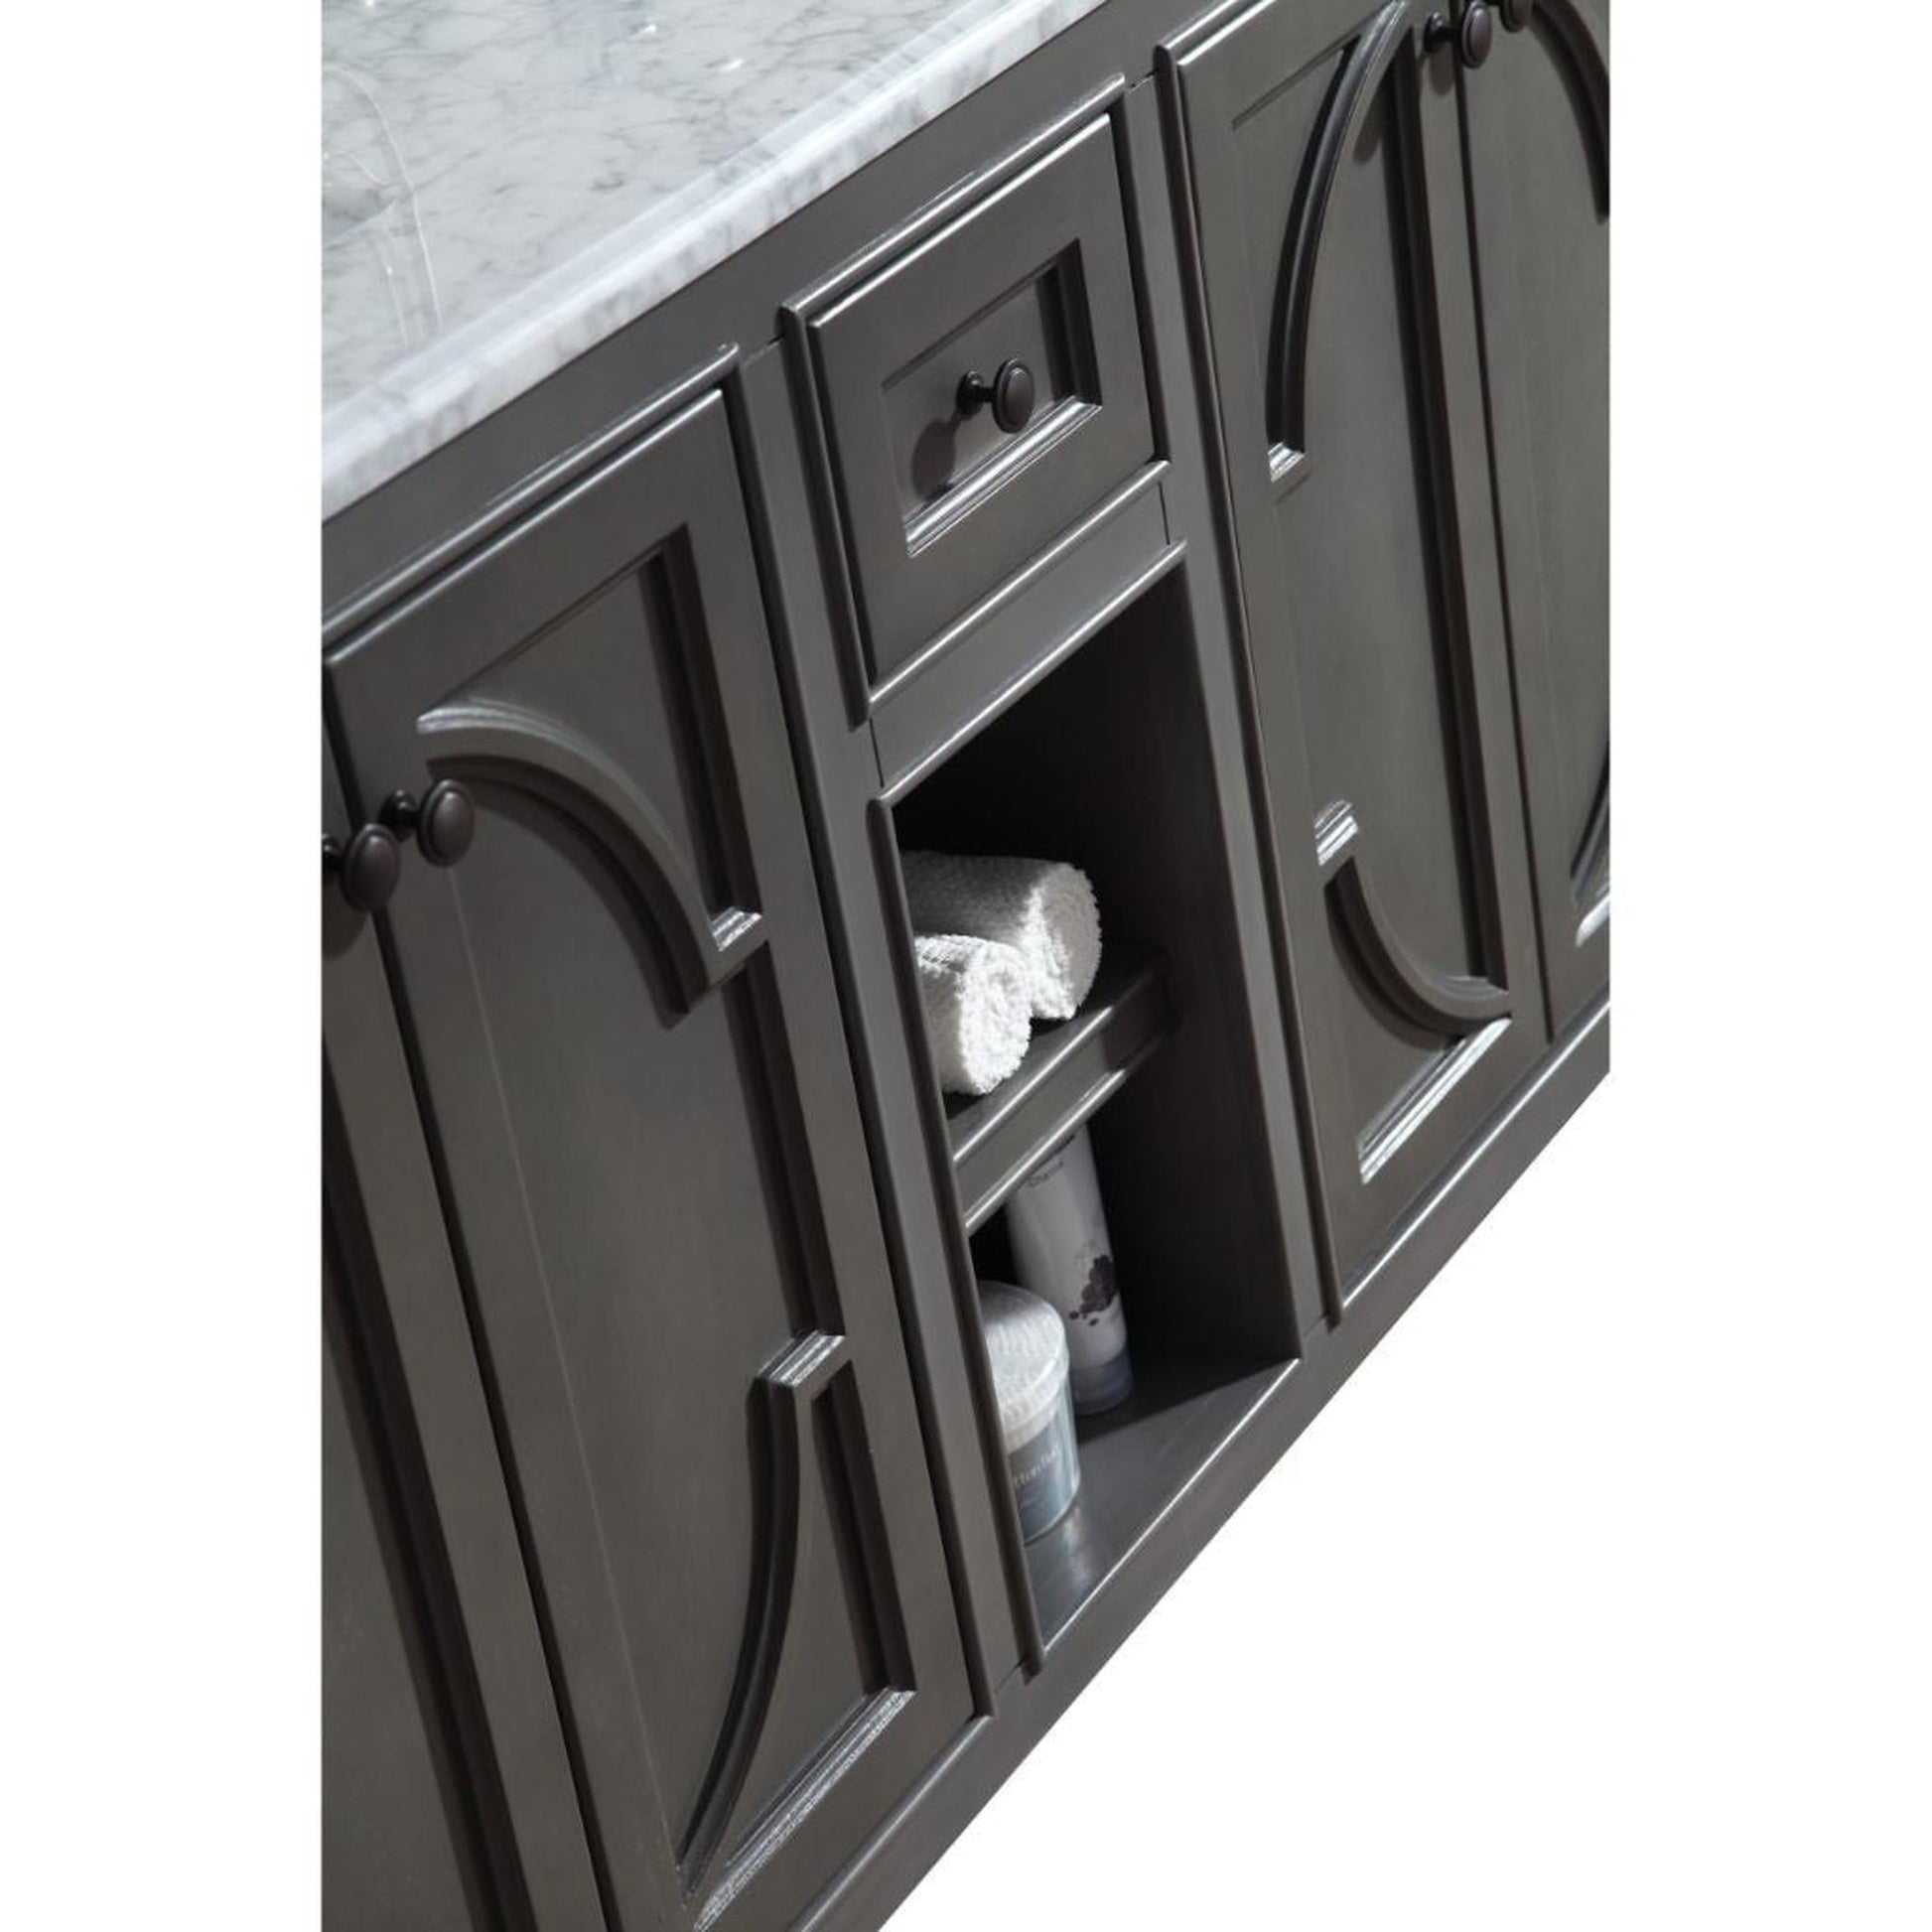 Laviva Odyssey 60" Maple Gray Vanity Base and Black Wood Marble Countertop With Double Rectangular Ceramic Sinks